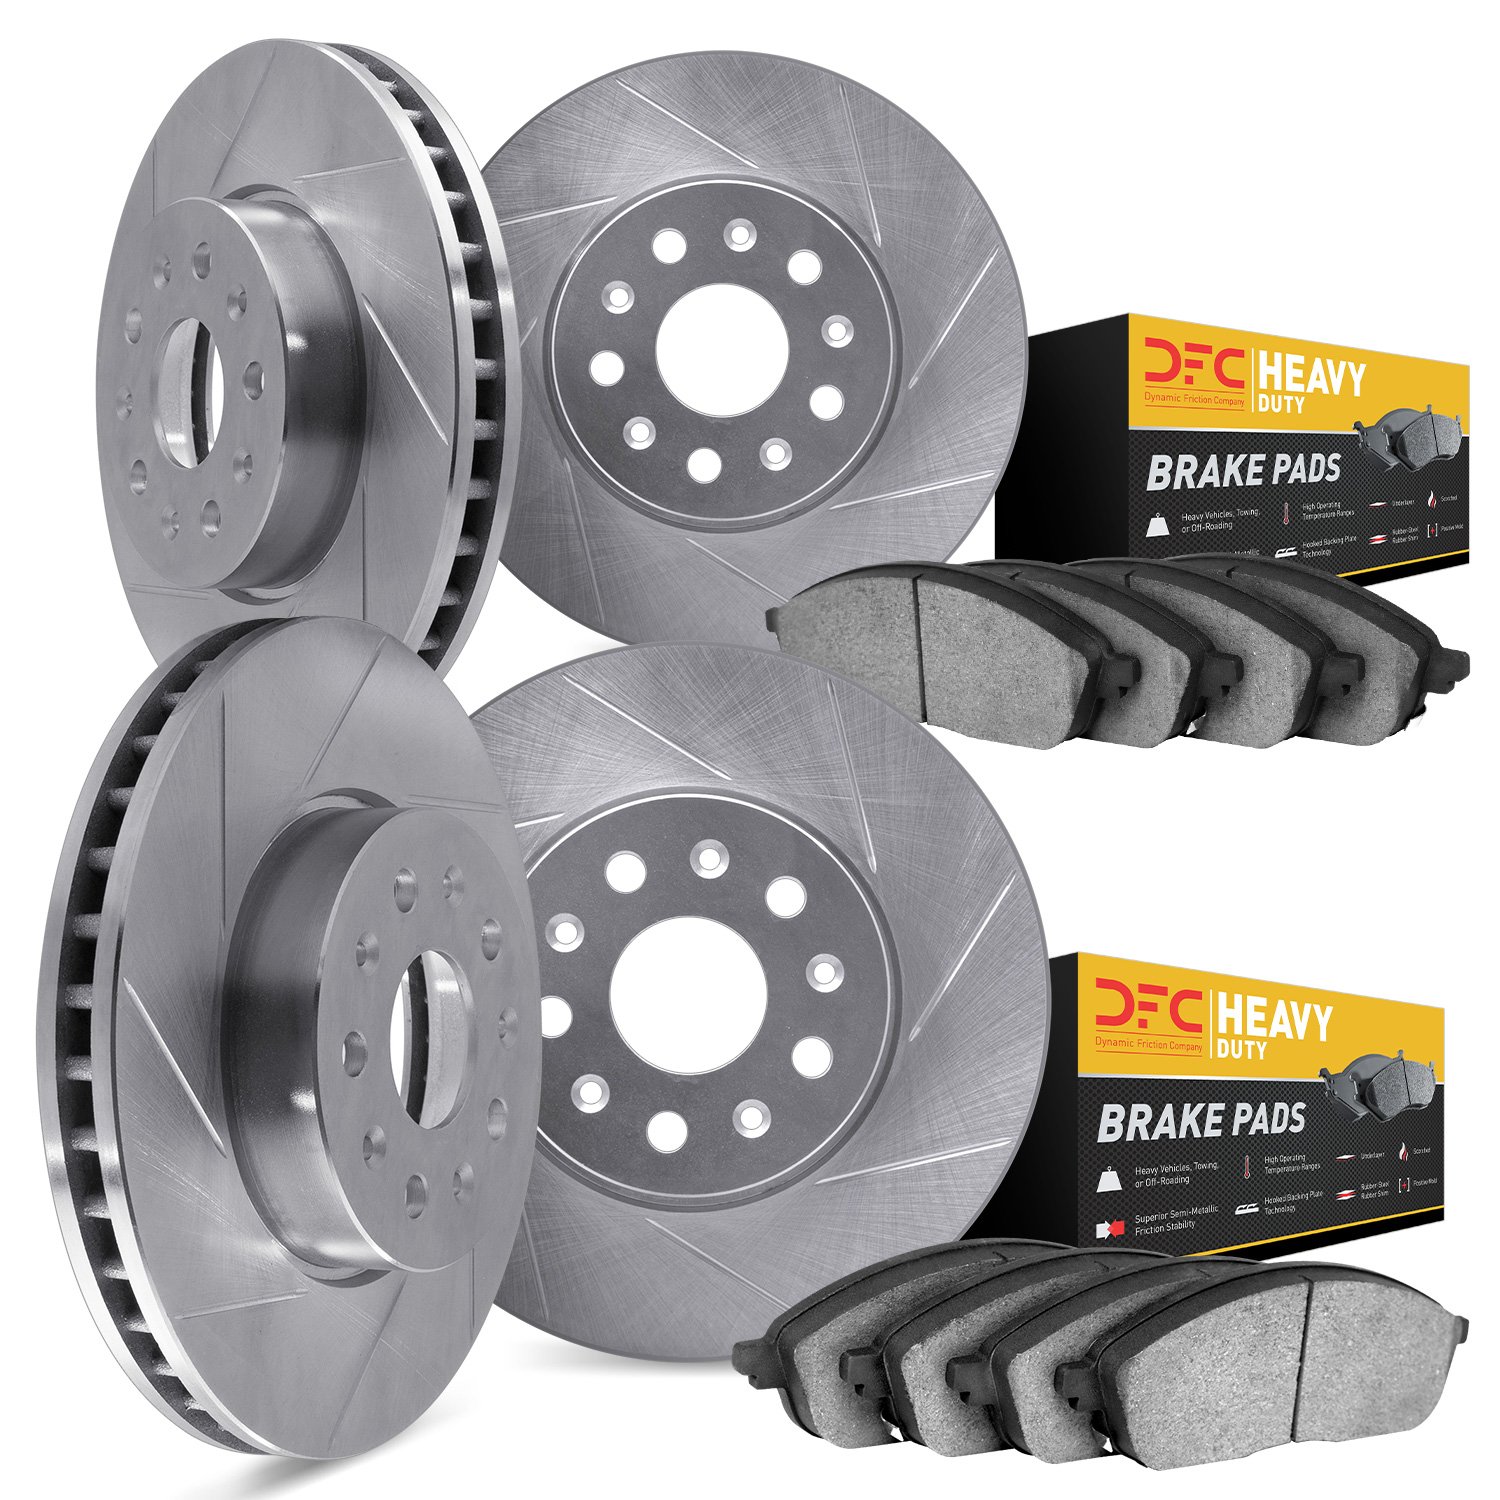 5204-39055 Slotted Brake Rotors w/Heavy-Duty Brake Pads Kits [Silver], Fits Select Mopar, Position: Front and Rear